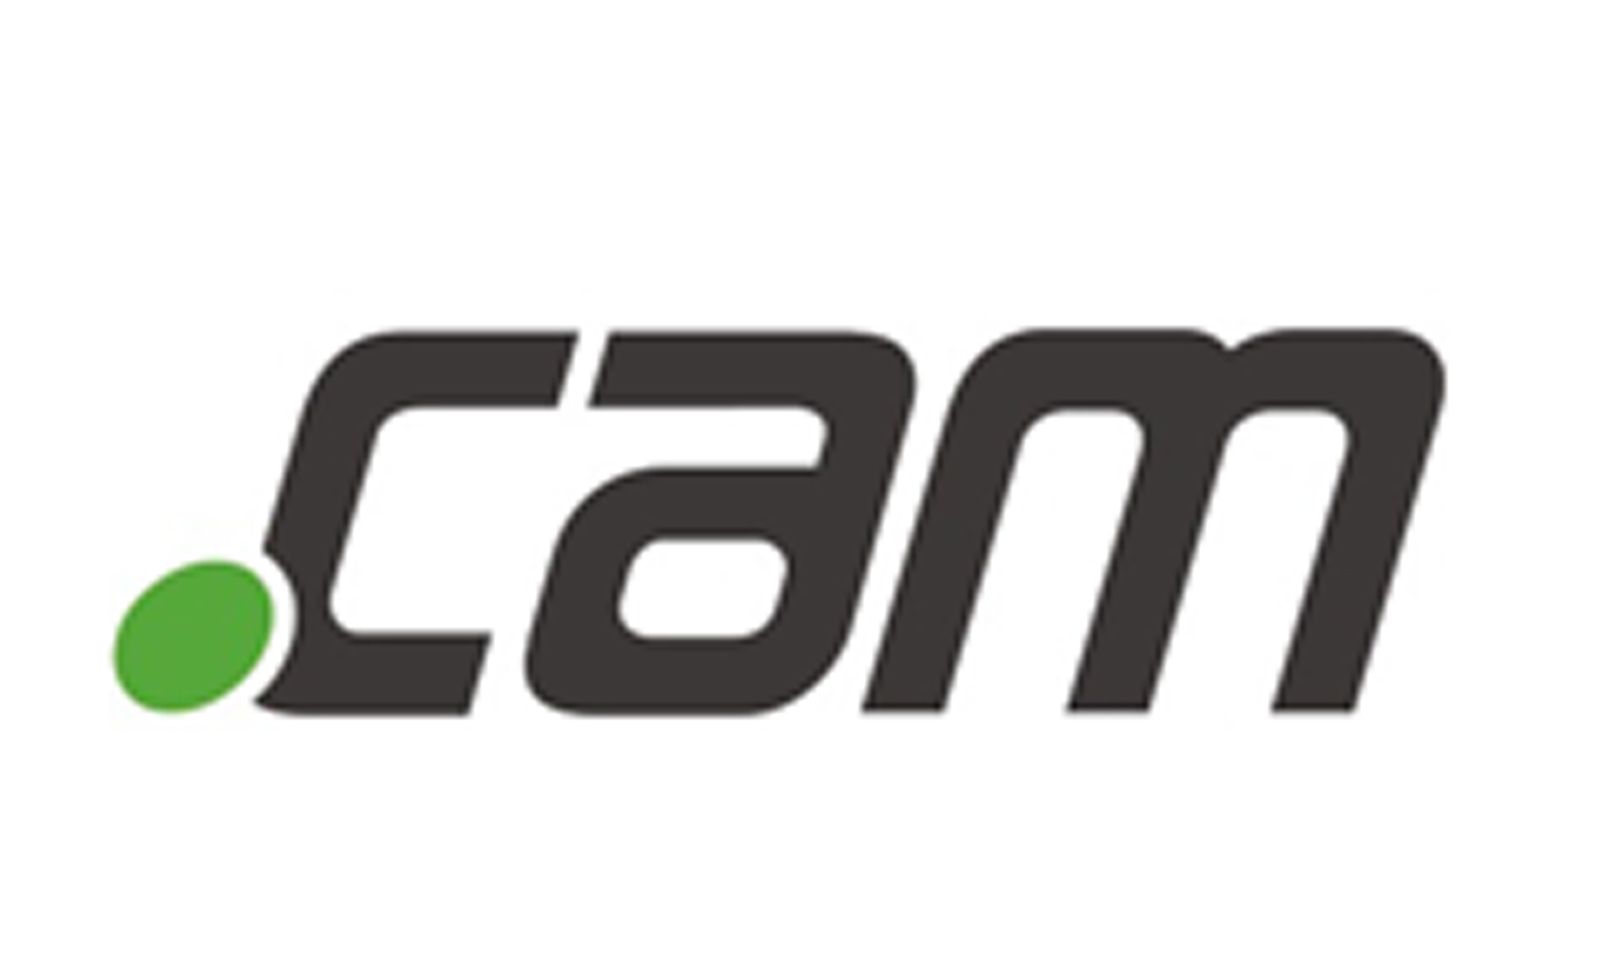 .CAM Extension Now Available for Trademark Owners